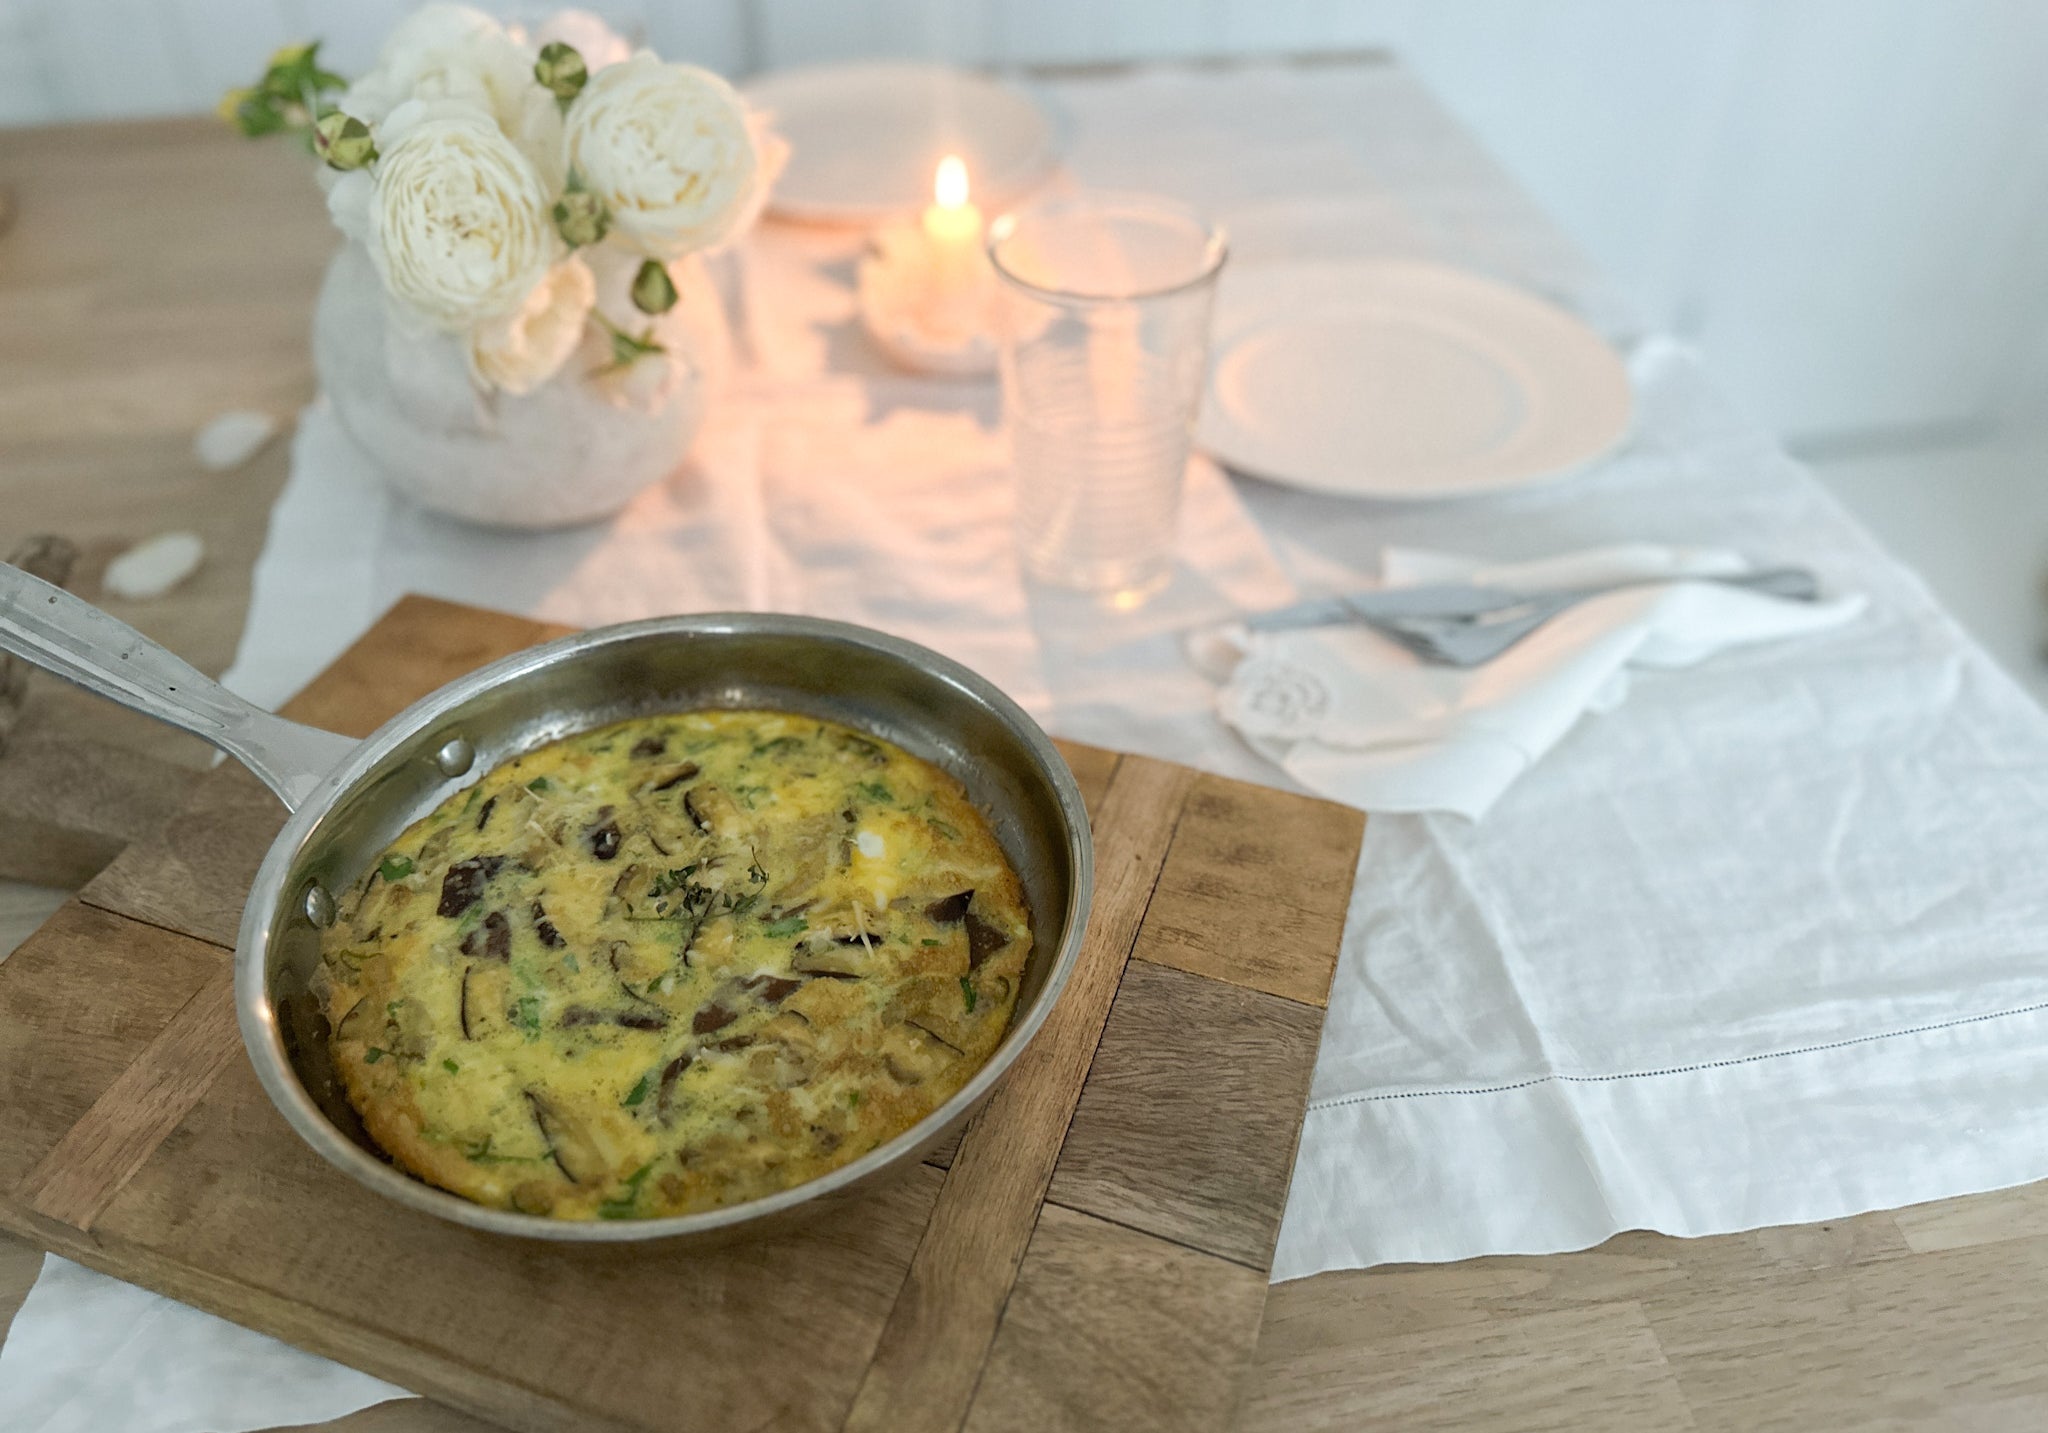 romantic table setting with a handmade frittata in pan fresh from the oven